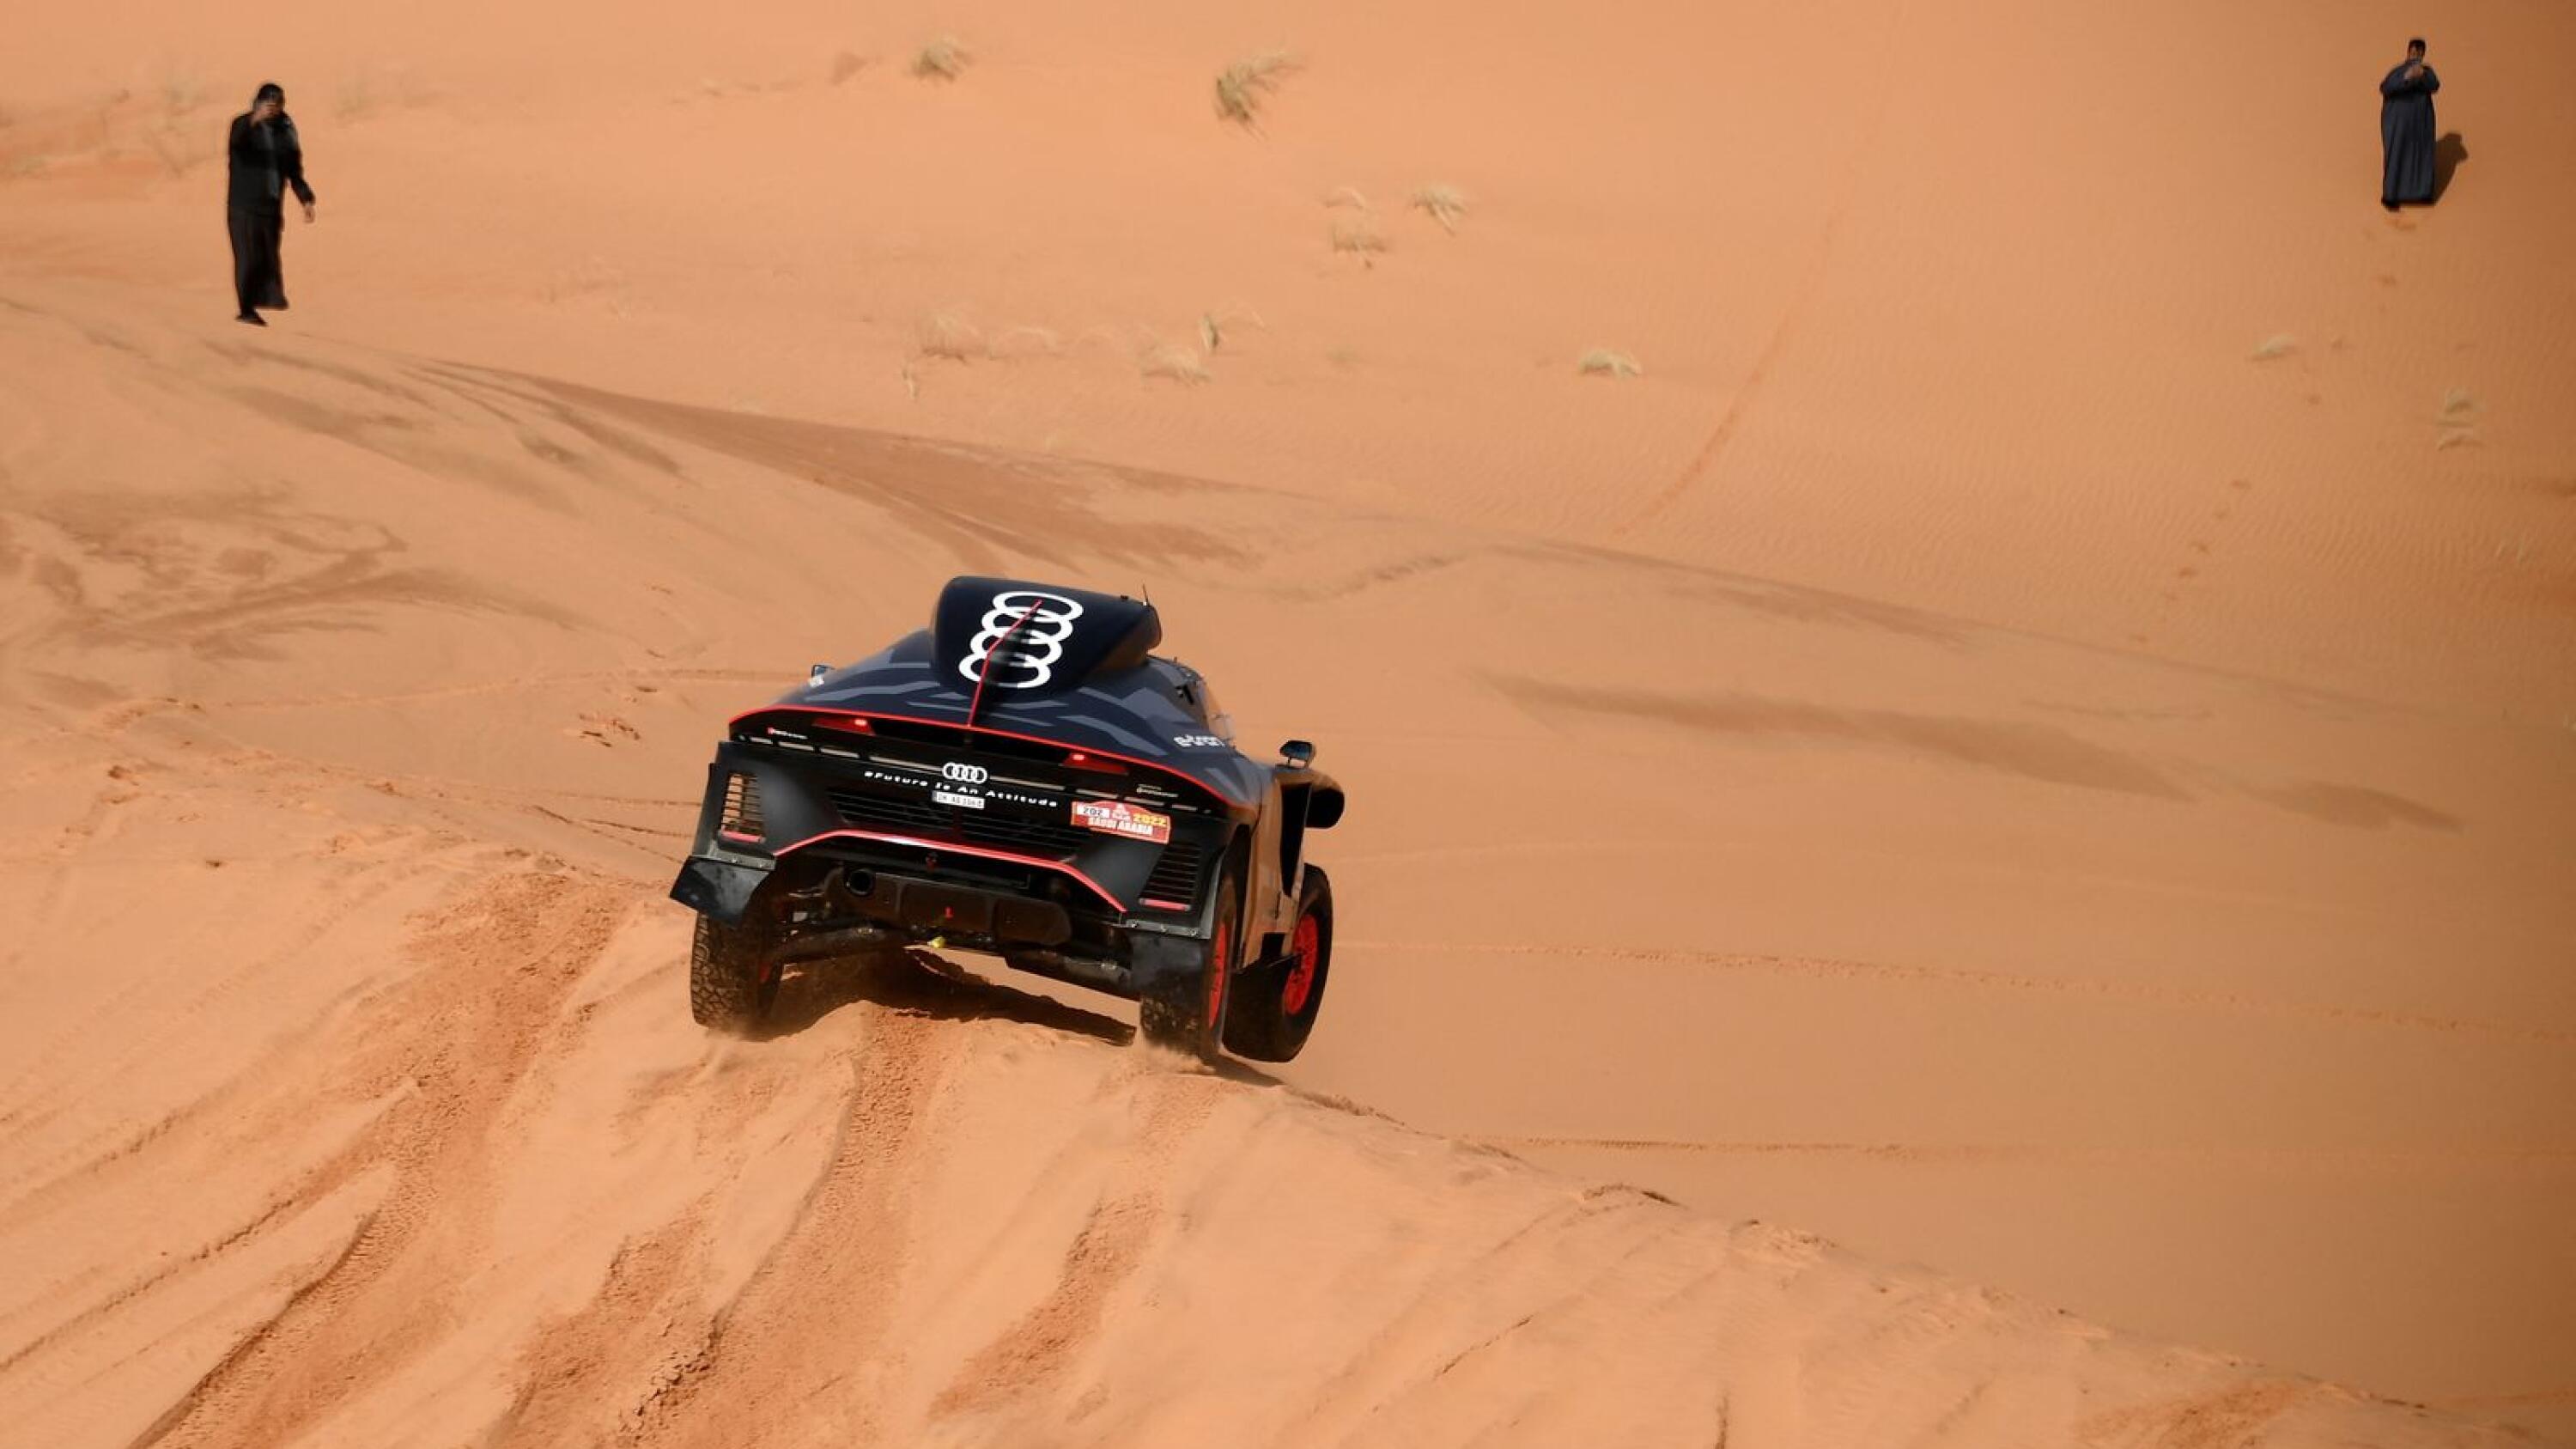 Audi's electric Spanish driver Carlos Sainz of Spain and co-driver Lucas Cruz of Spain compete during Stage 3 of the Dakar Rally 2022 between the Saudi areas of al-Artawiya and al-Qaysumah, on Tuesday